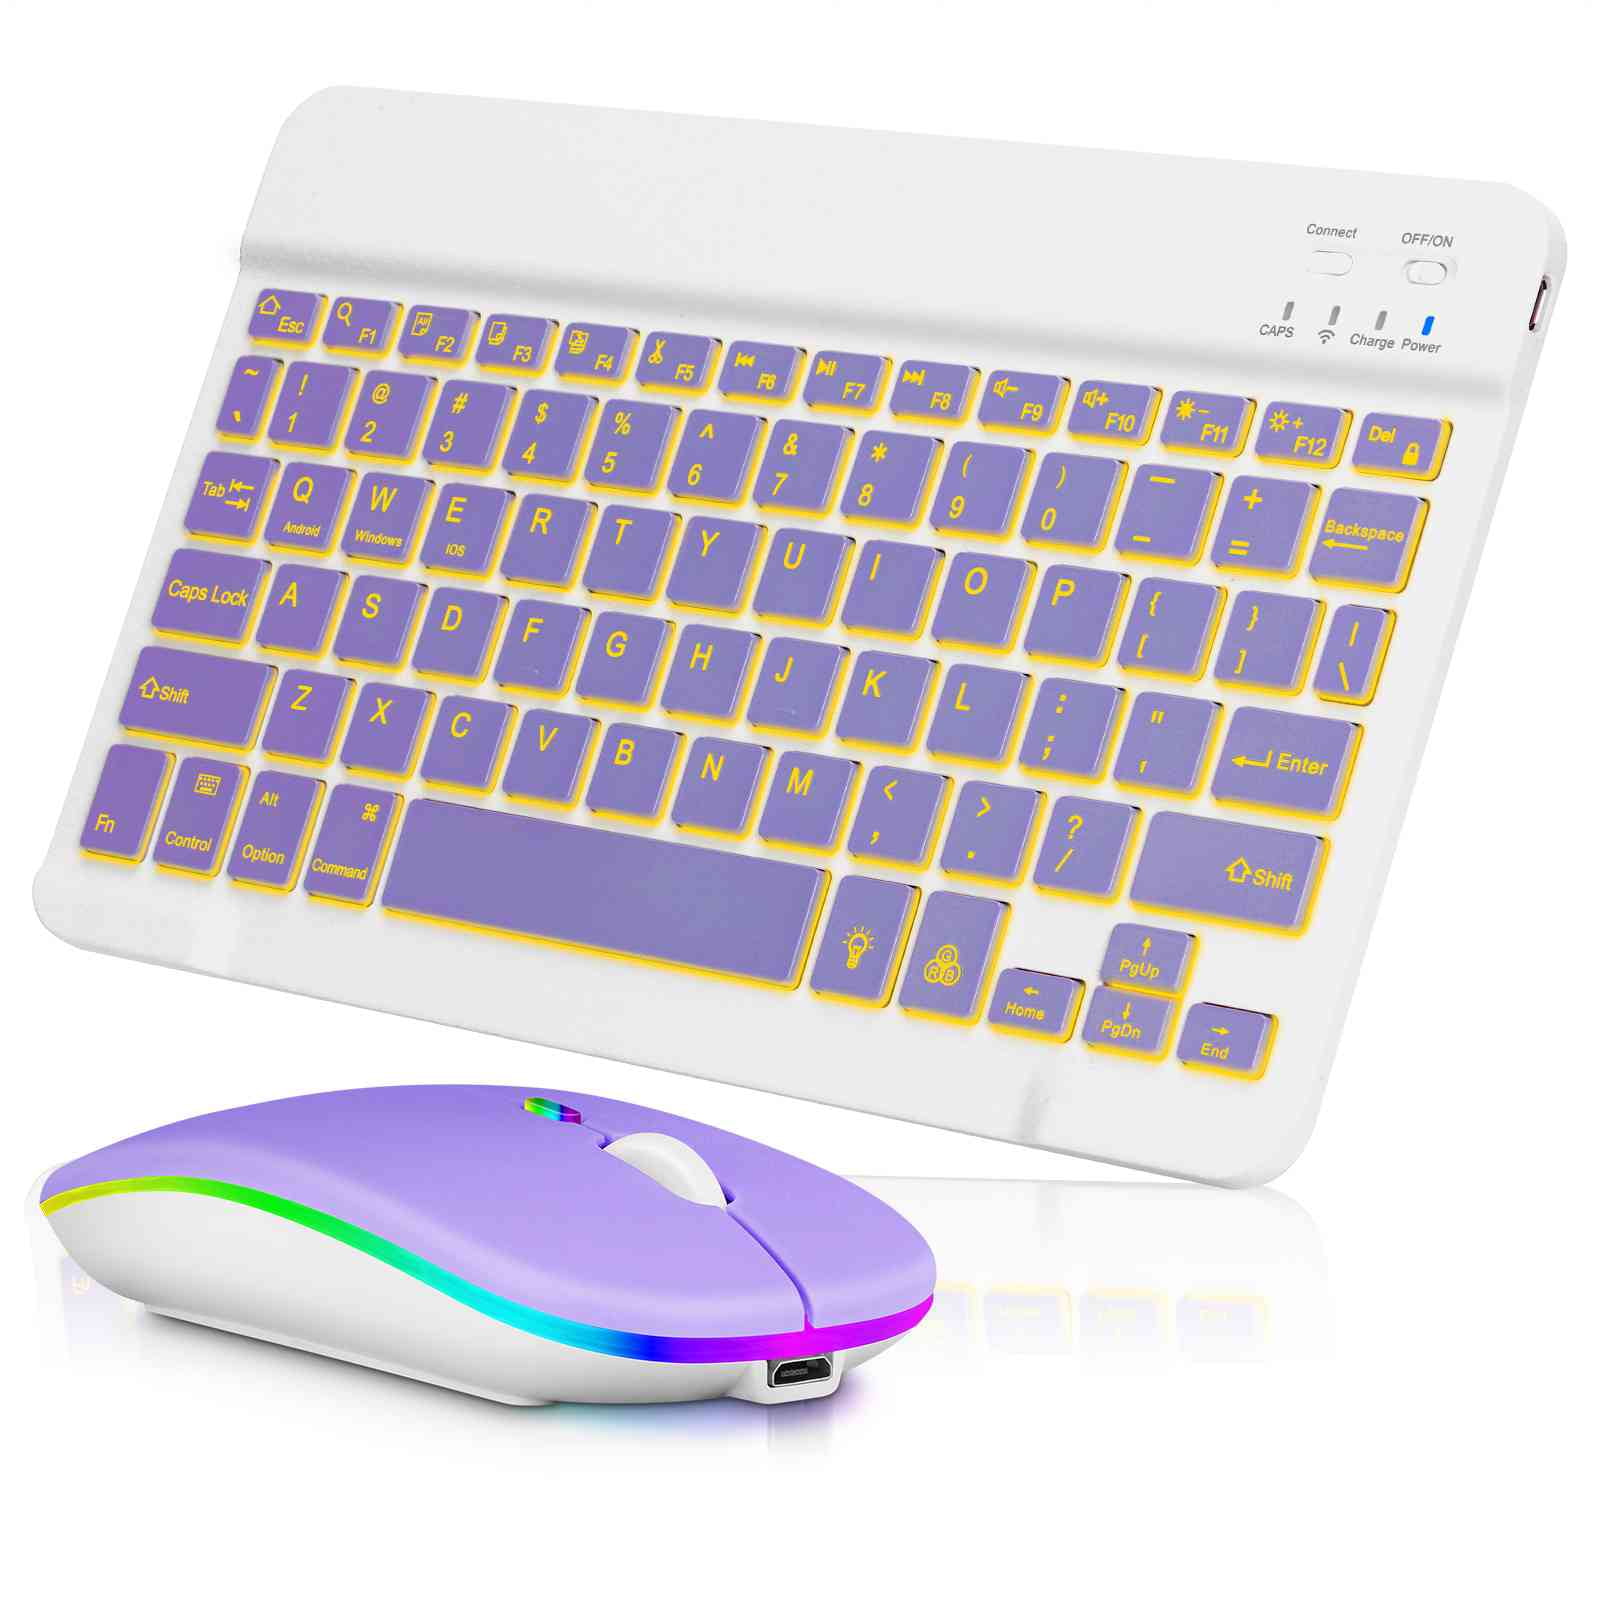 UX030 Lightweight Keyboard and Mouse with Background RGB Light, Multi  Device slim Rechargeable Keyboard Bluetooth  and  Stable  Connection Keyboard for iPad, iPhone, Mac, iOS, Android, Windows -  